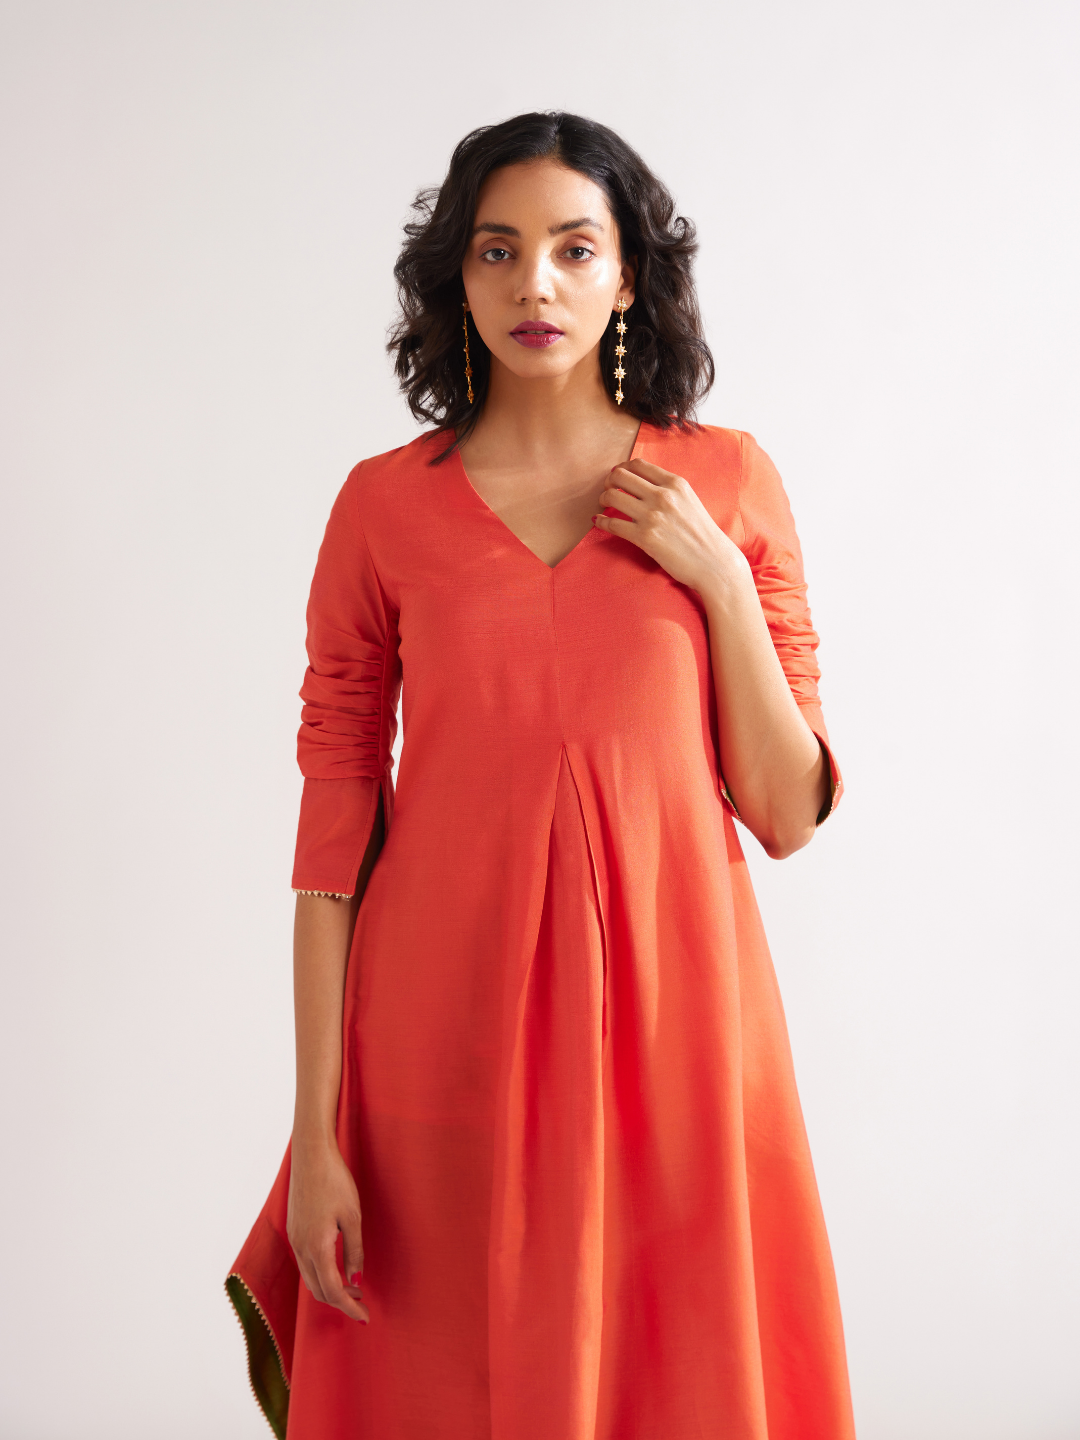 Inverted box pleat flare kurta paired with pegged pants- Spicy Orange